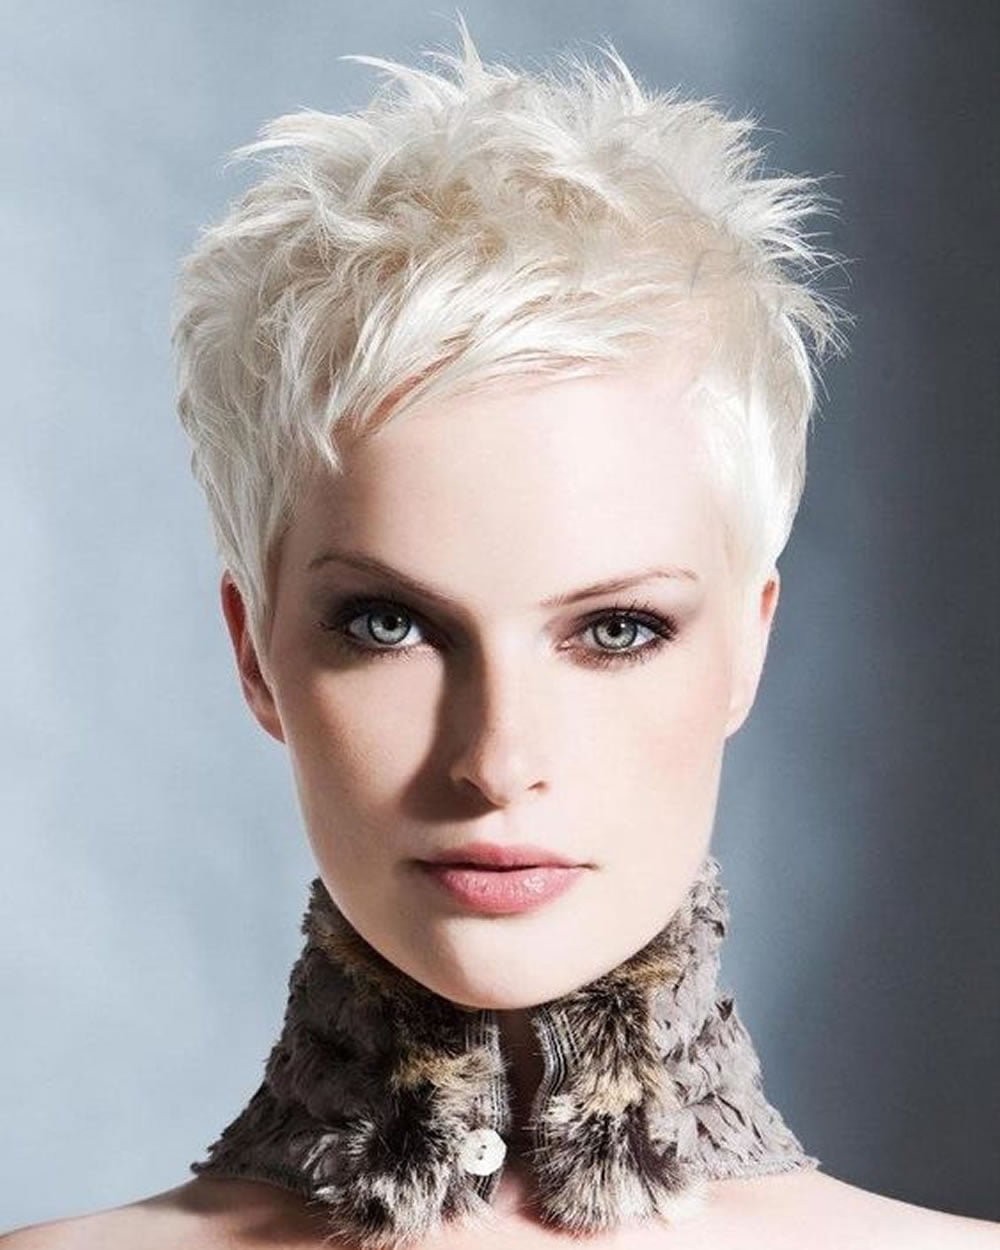 Super Very Short Pixie Haircuts & Short Hair Colors 2018-2019 – HAIRSTYLES